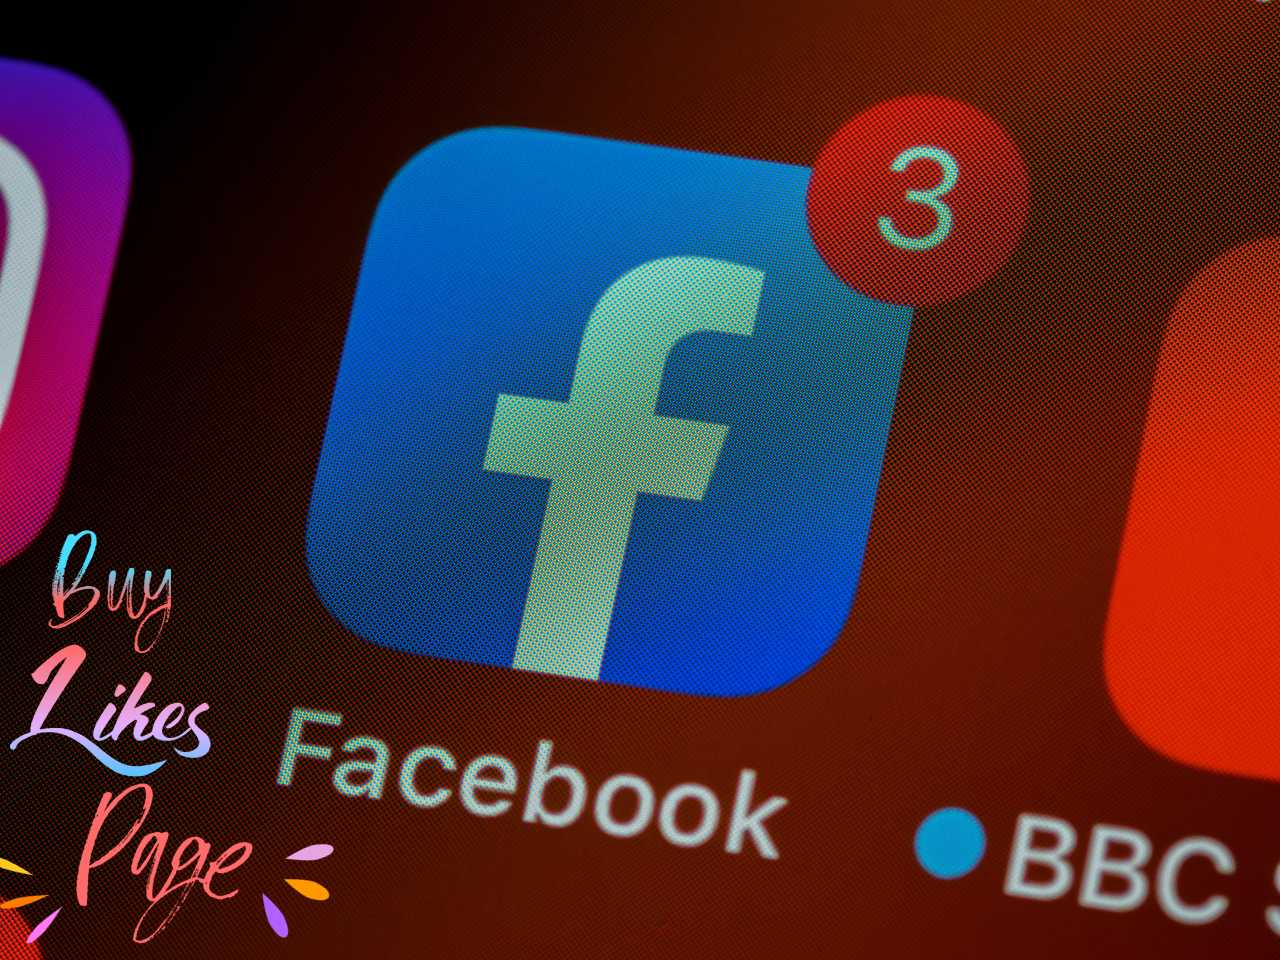 You need to Grow Your Business with Facebook Page Likes